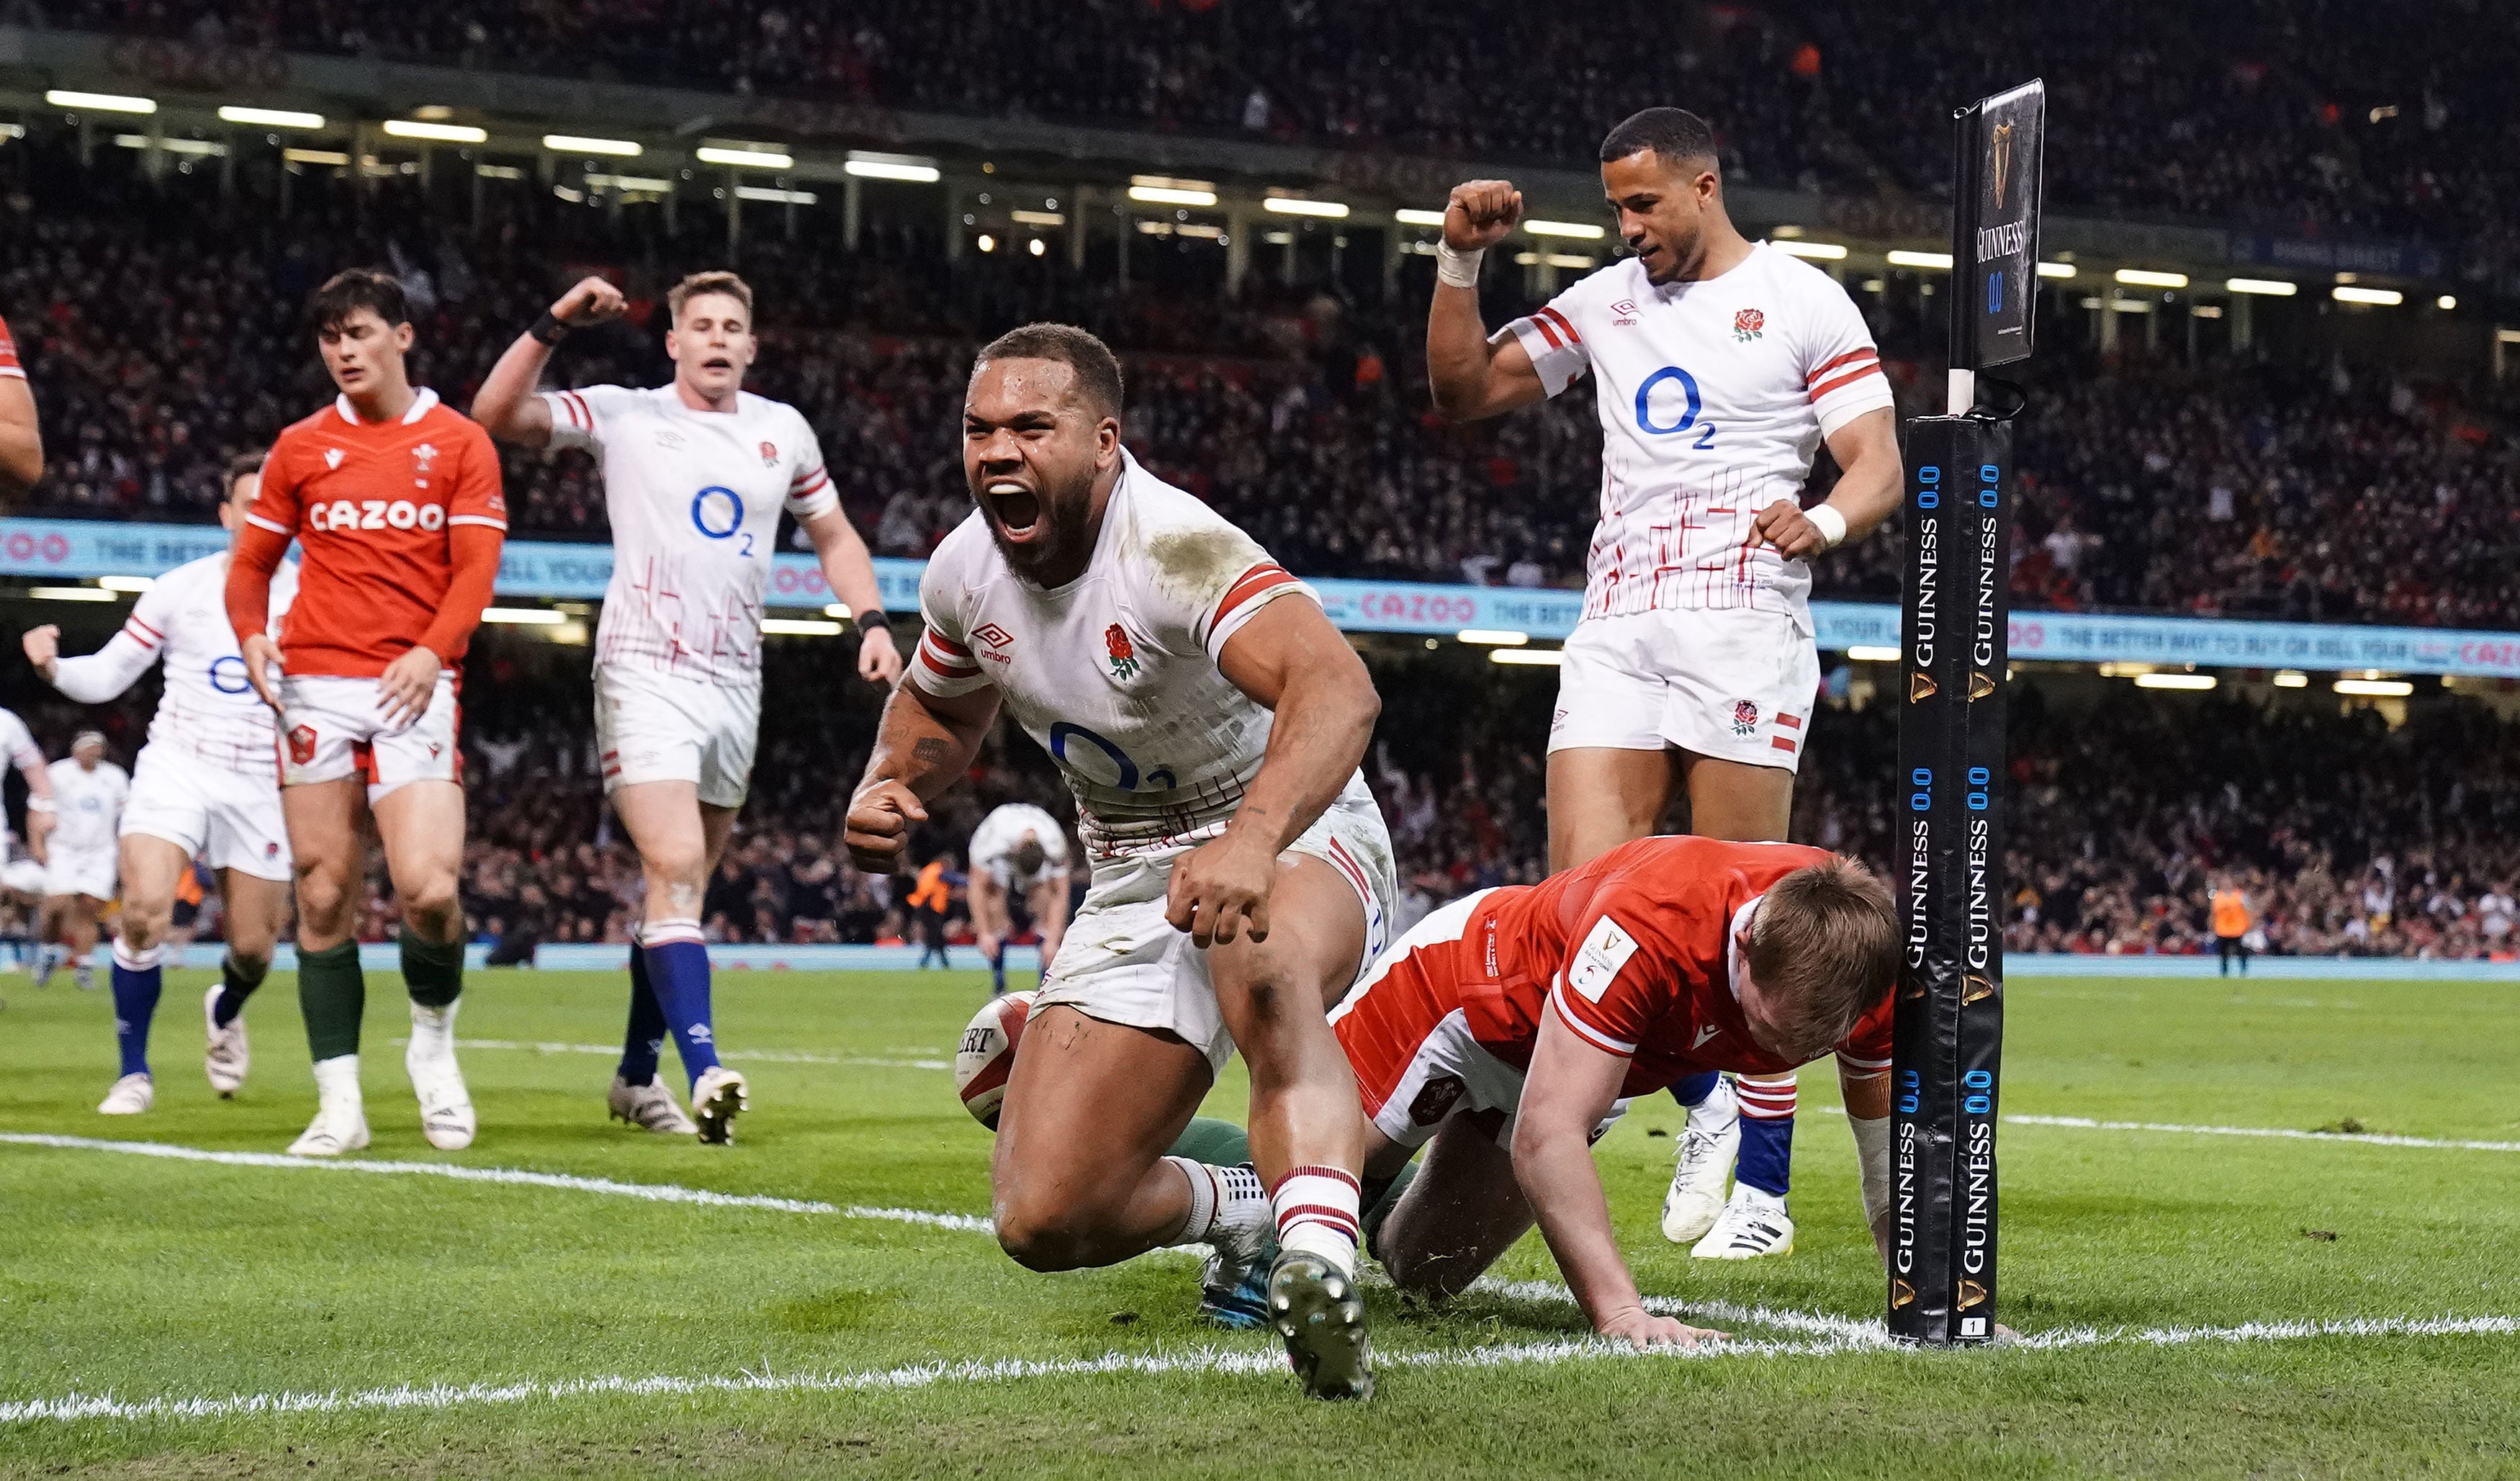 Steve Borthwick explains how England are growing after Wales win The Independent